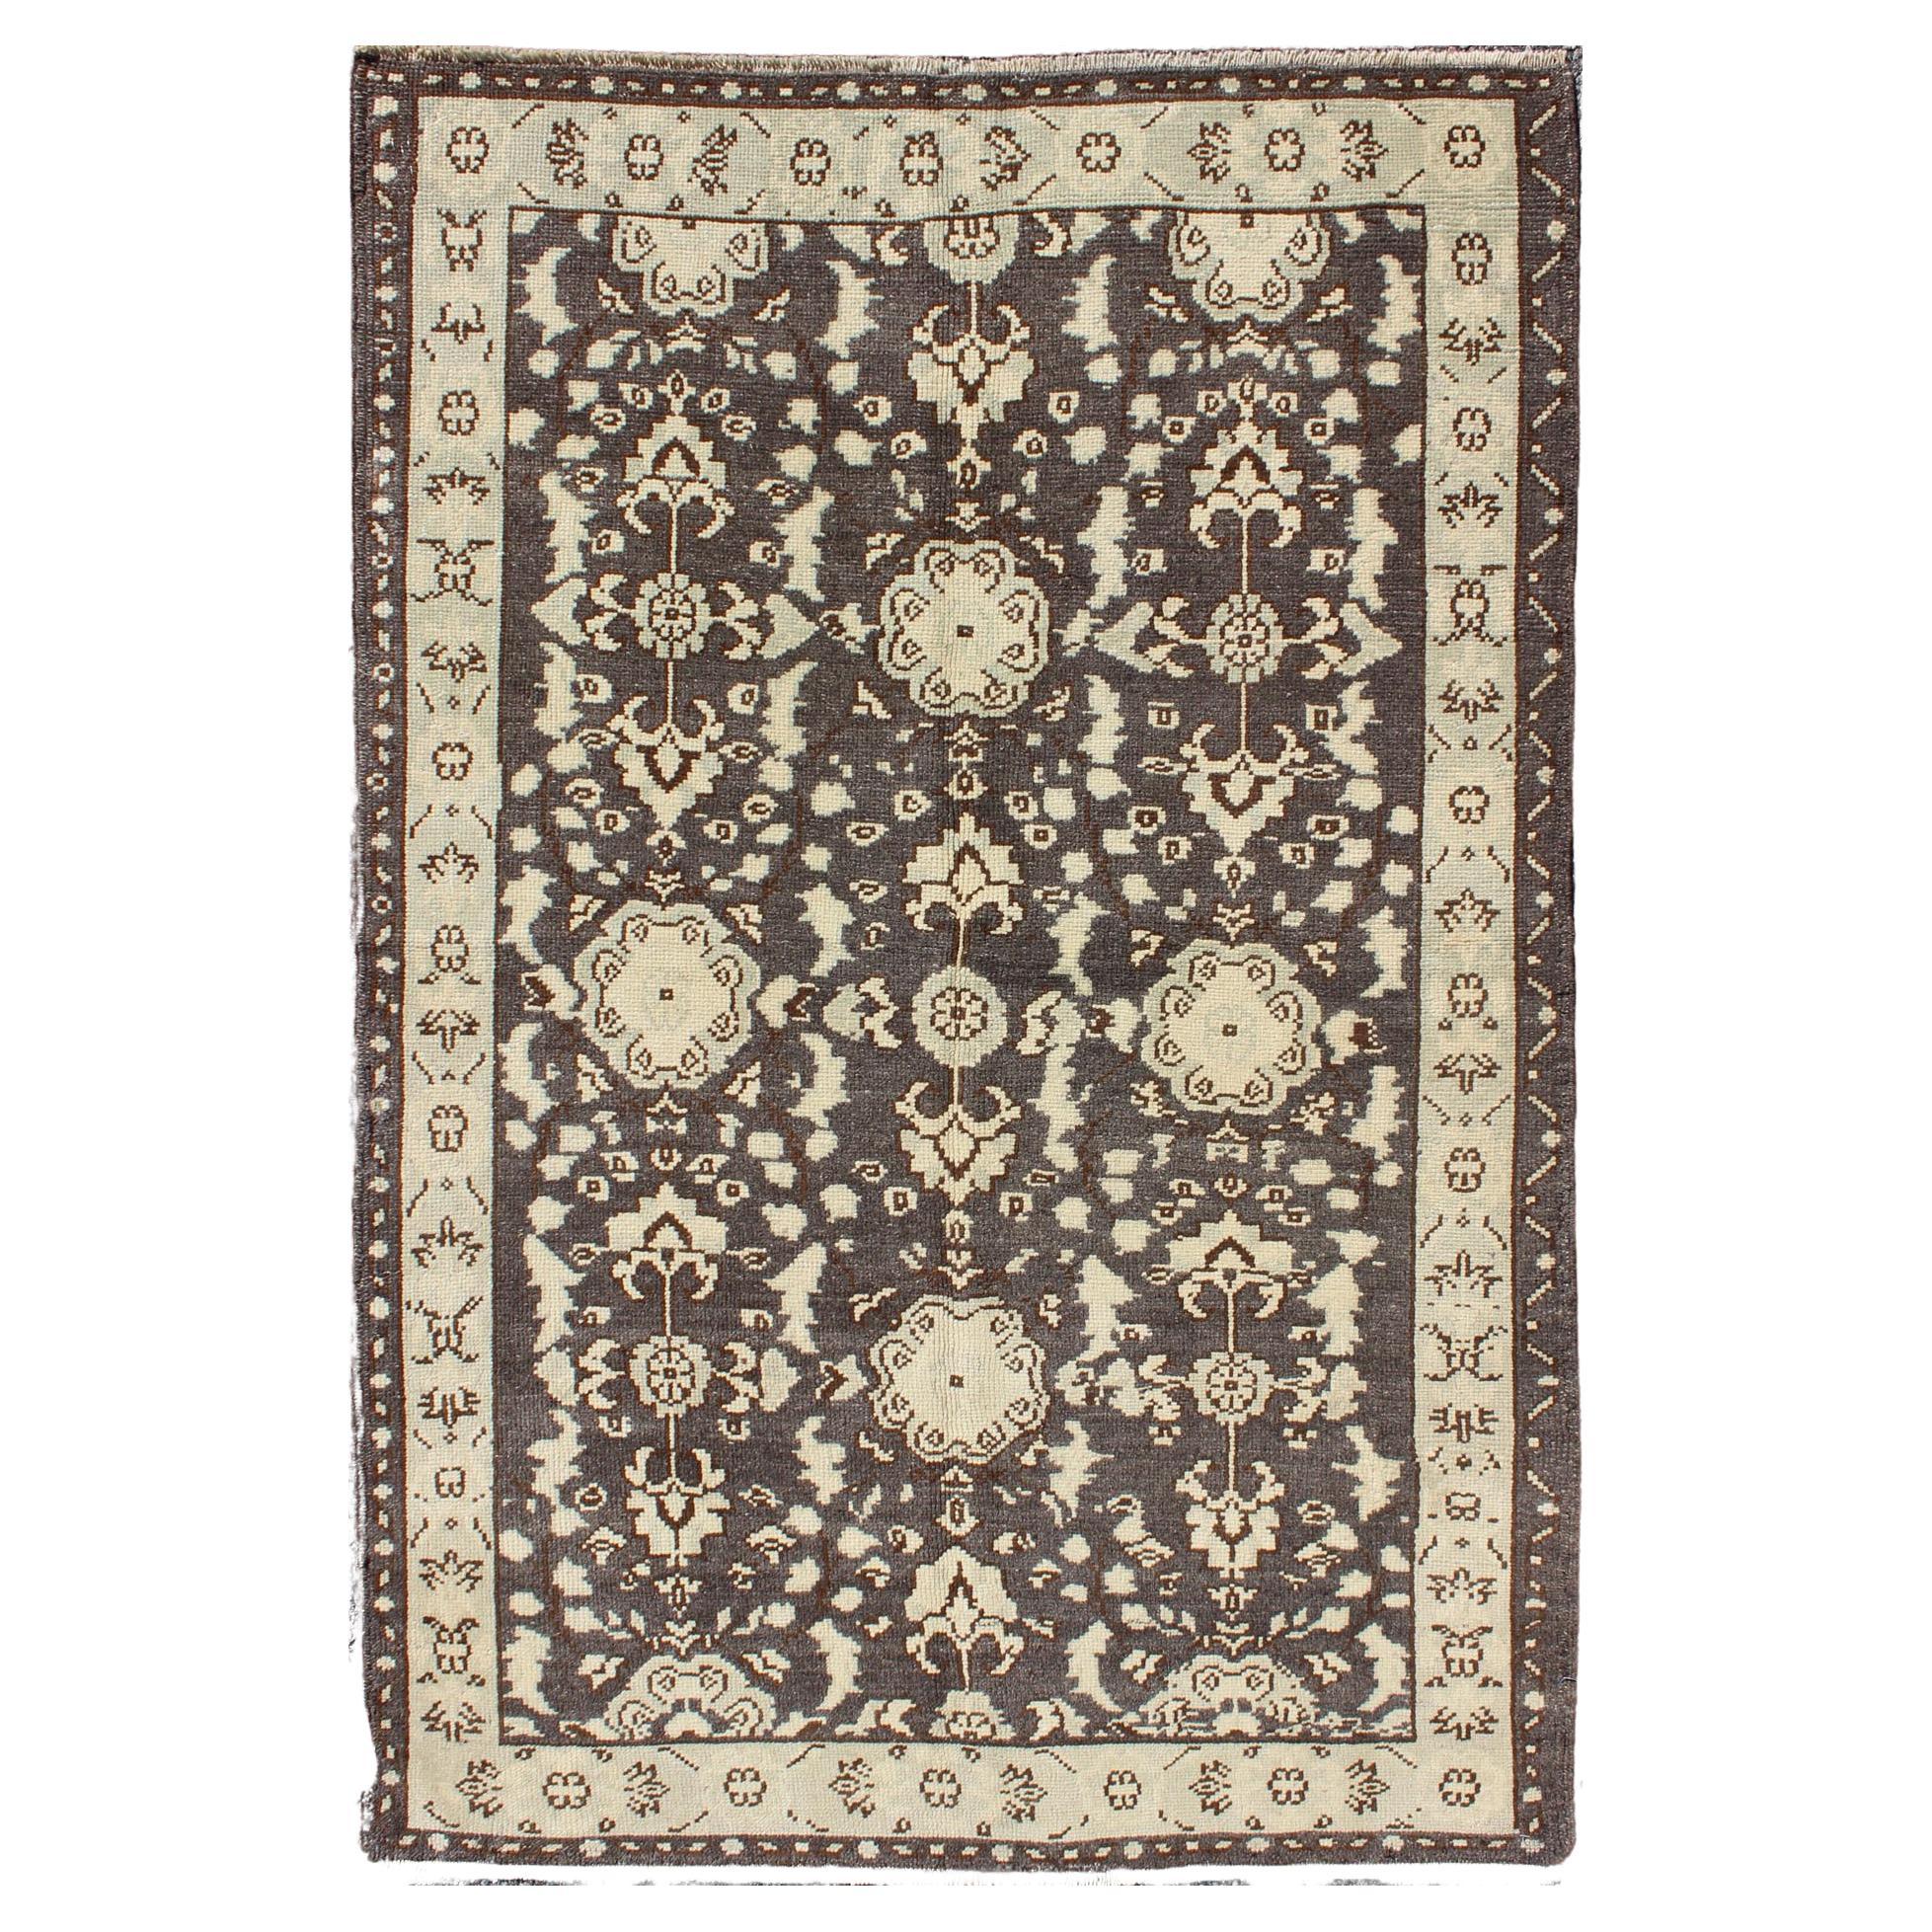 Vintage Turkish Oushak Area Rug in Dark Charcoal, Brown, and Ivory